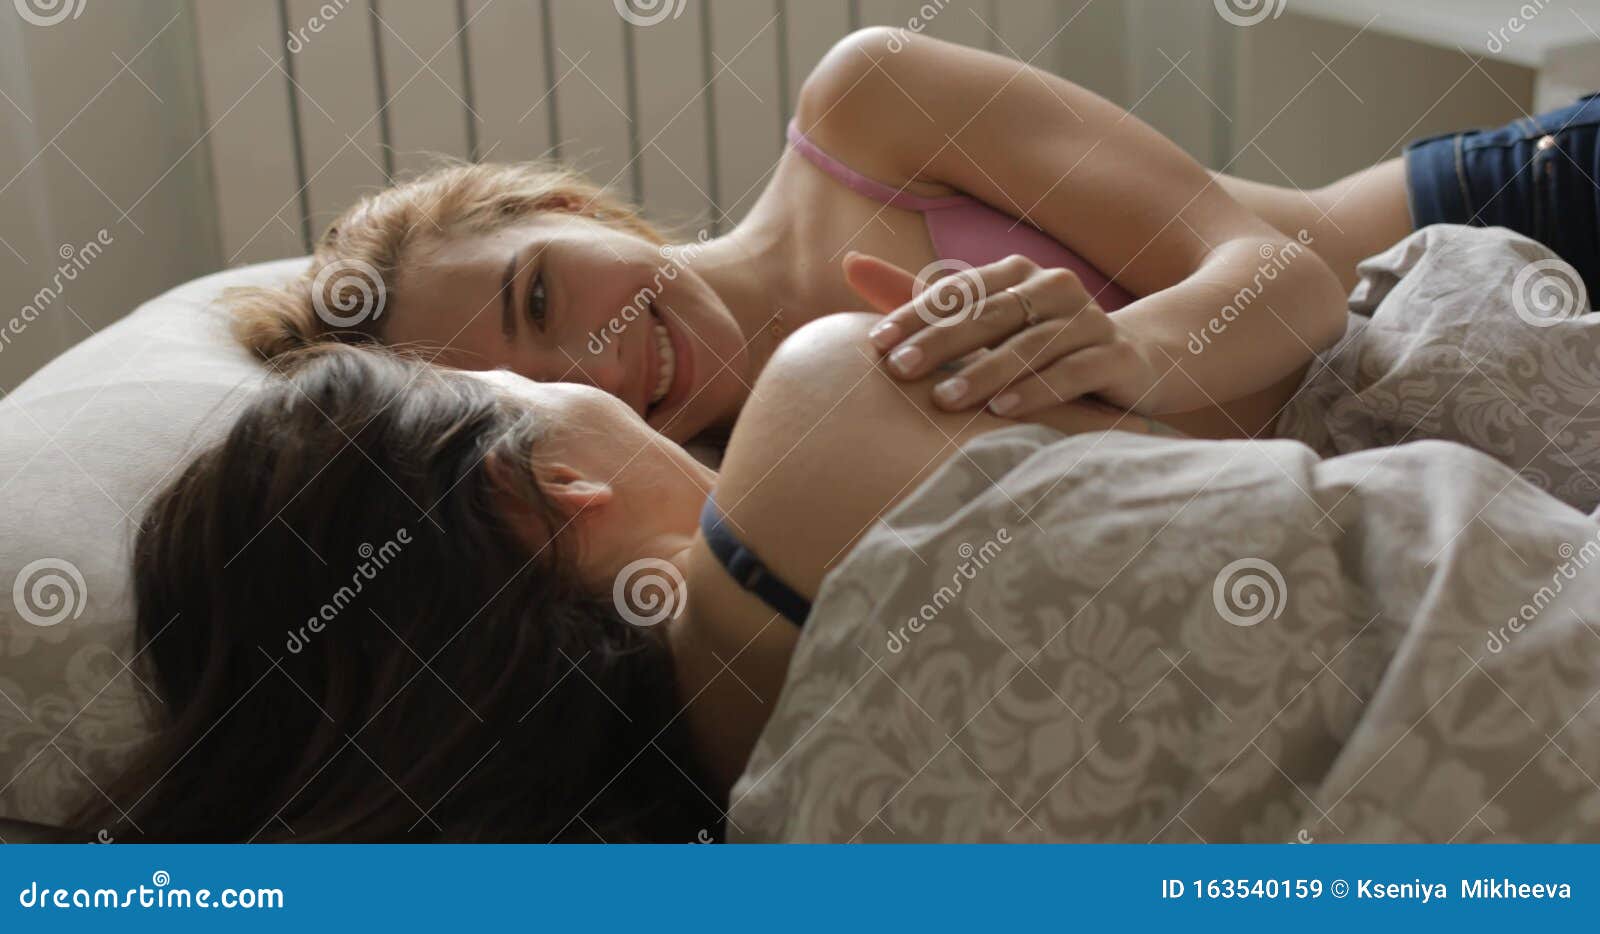 2 beautiful lesbian loving french kissing on the bed